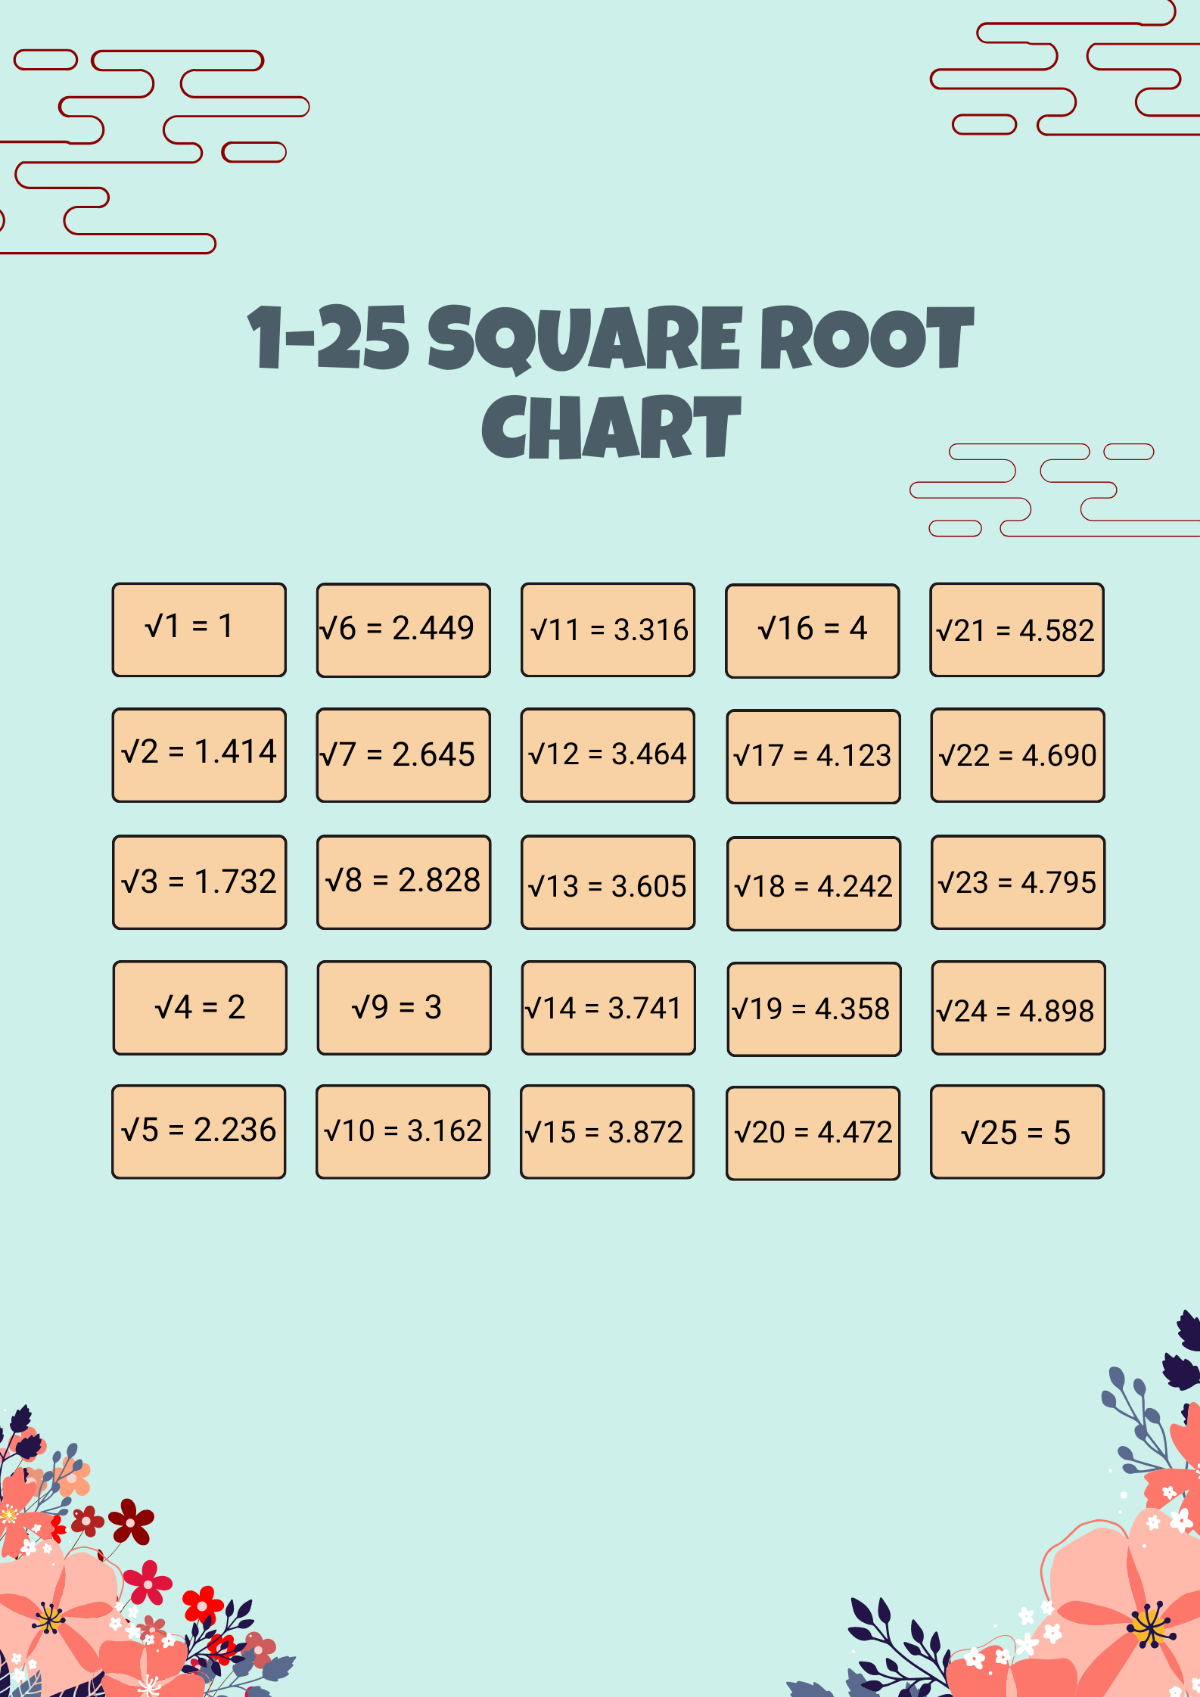 1-25 Square Root Chart Template